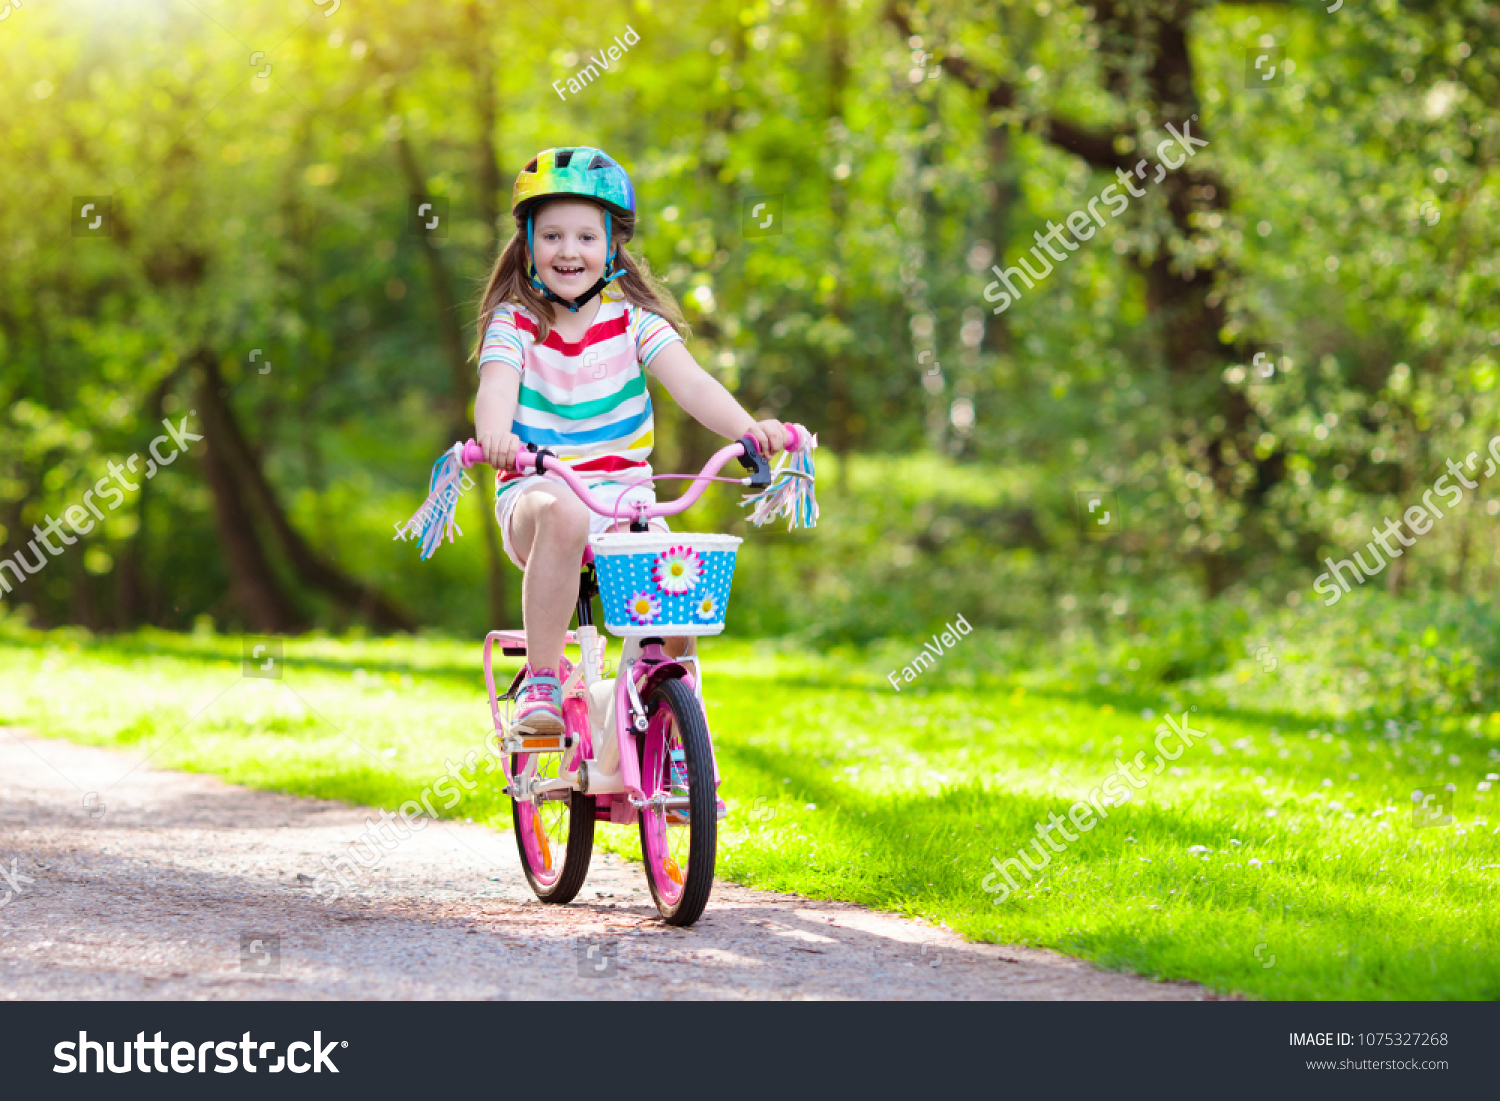 how old to ride a bike without training wheels